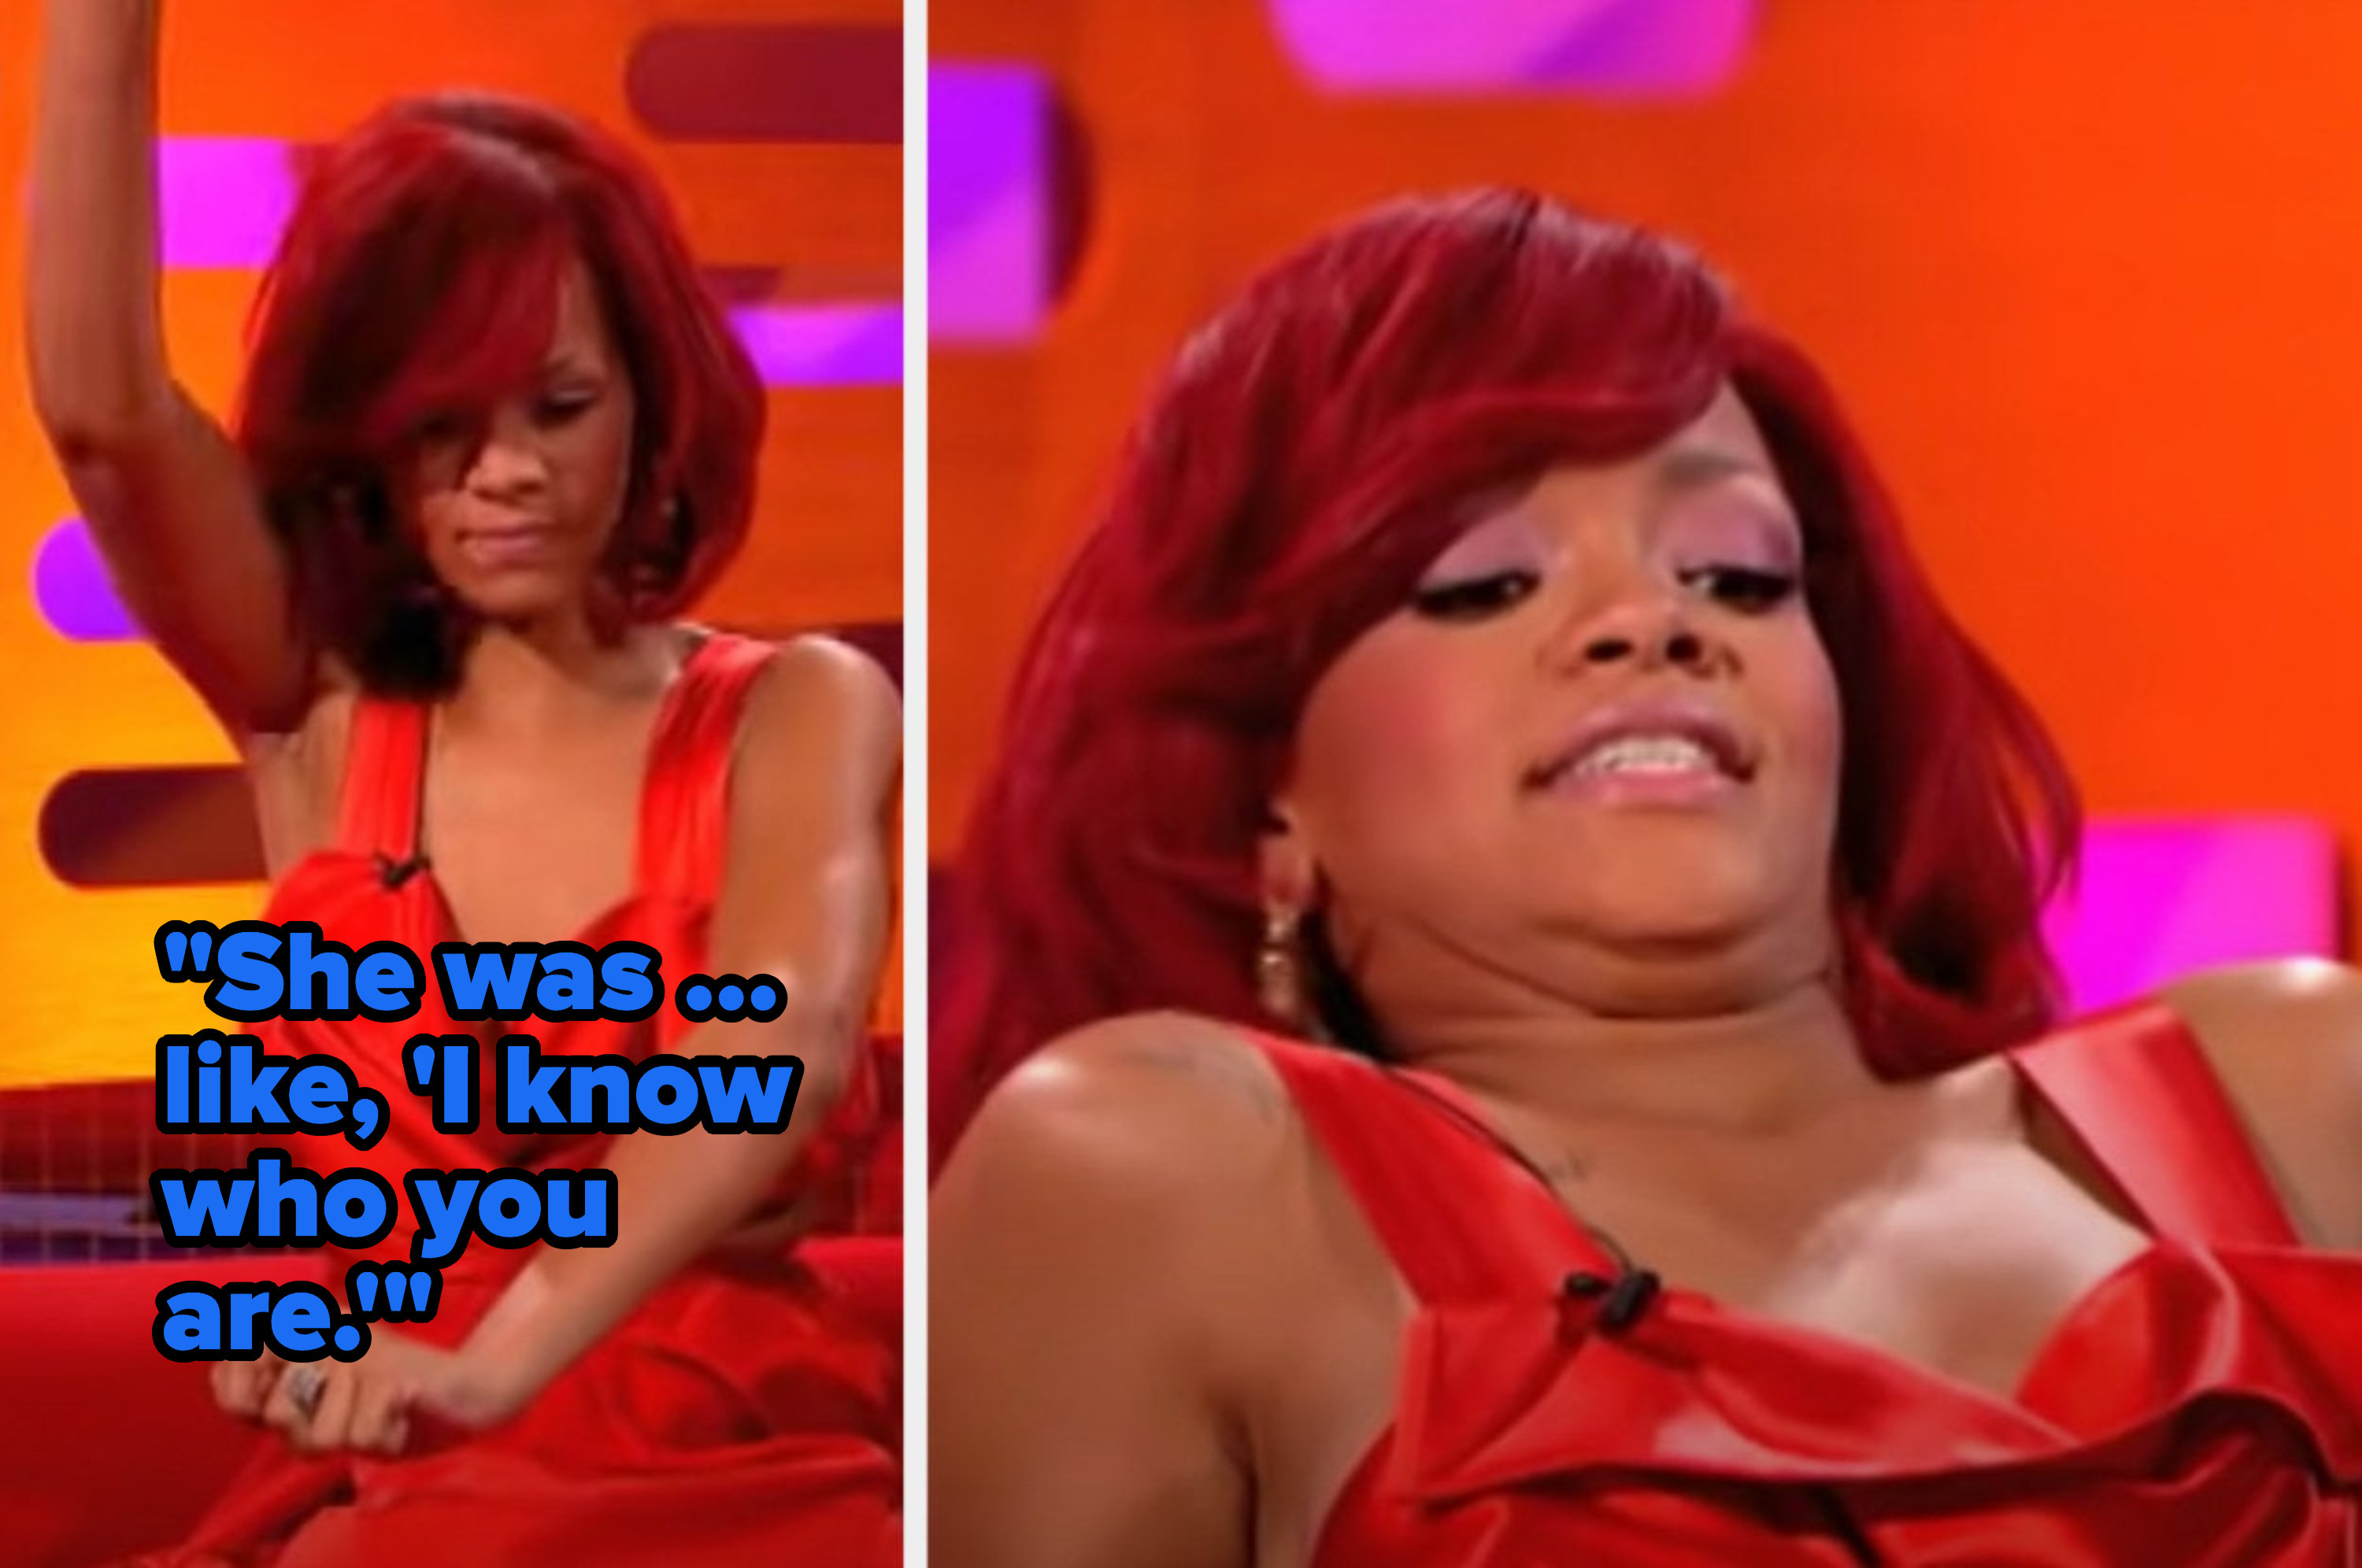 Rihanna remembers being recognized while simultaneously getting a bikini wax done